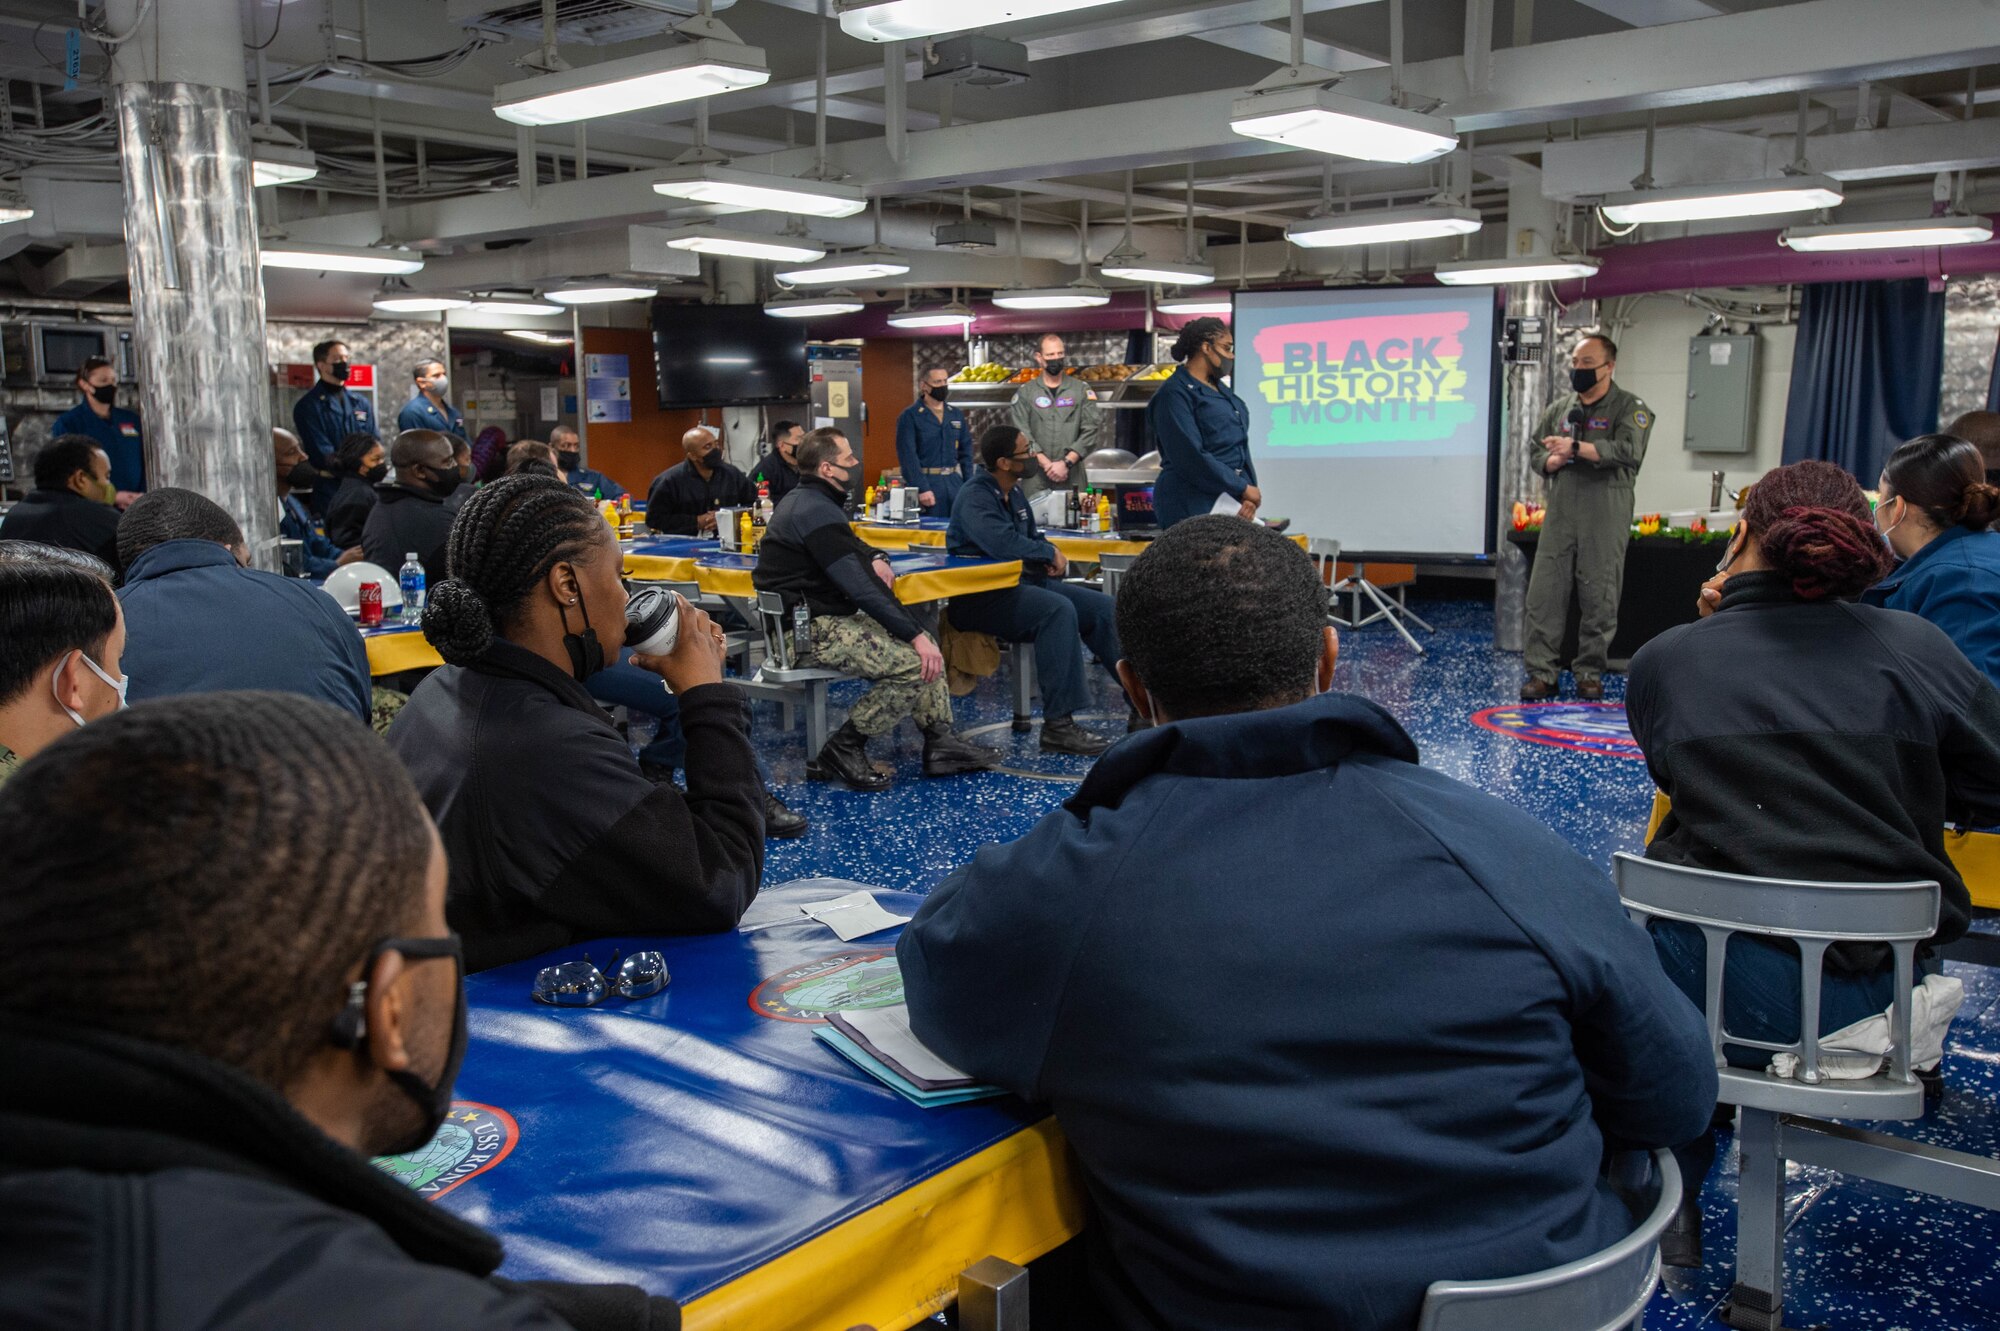 Capt. Fred Goldhammer, commanding officer of the U.S. Navy’s only forward-deployed aircraft carrier USS Ronald Reagan (CVN 76), delivers remarks during a Black History Month celebration on the mess decks, Feb. 24, 2022.